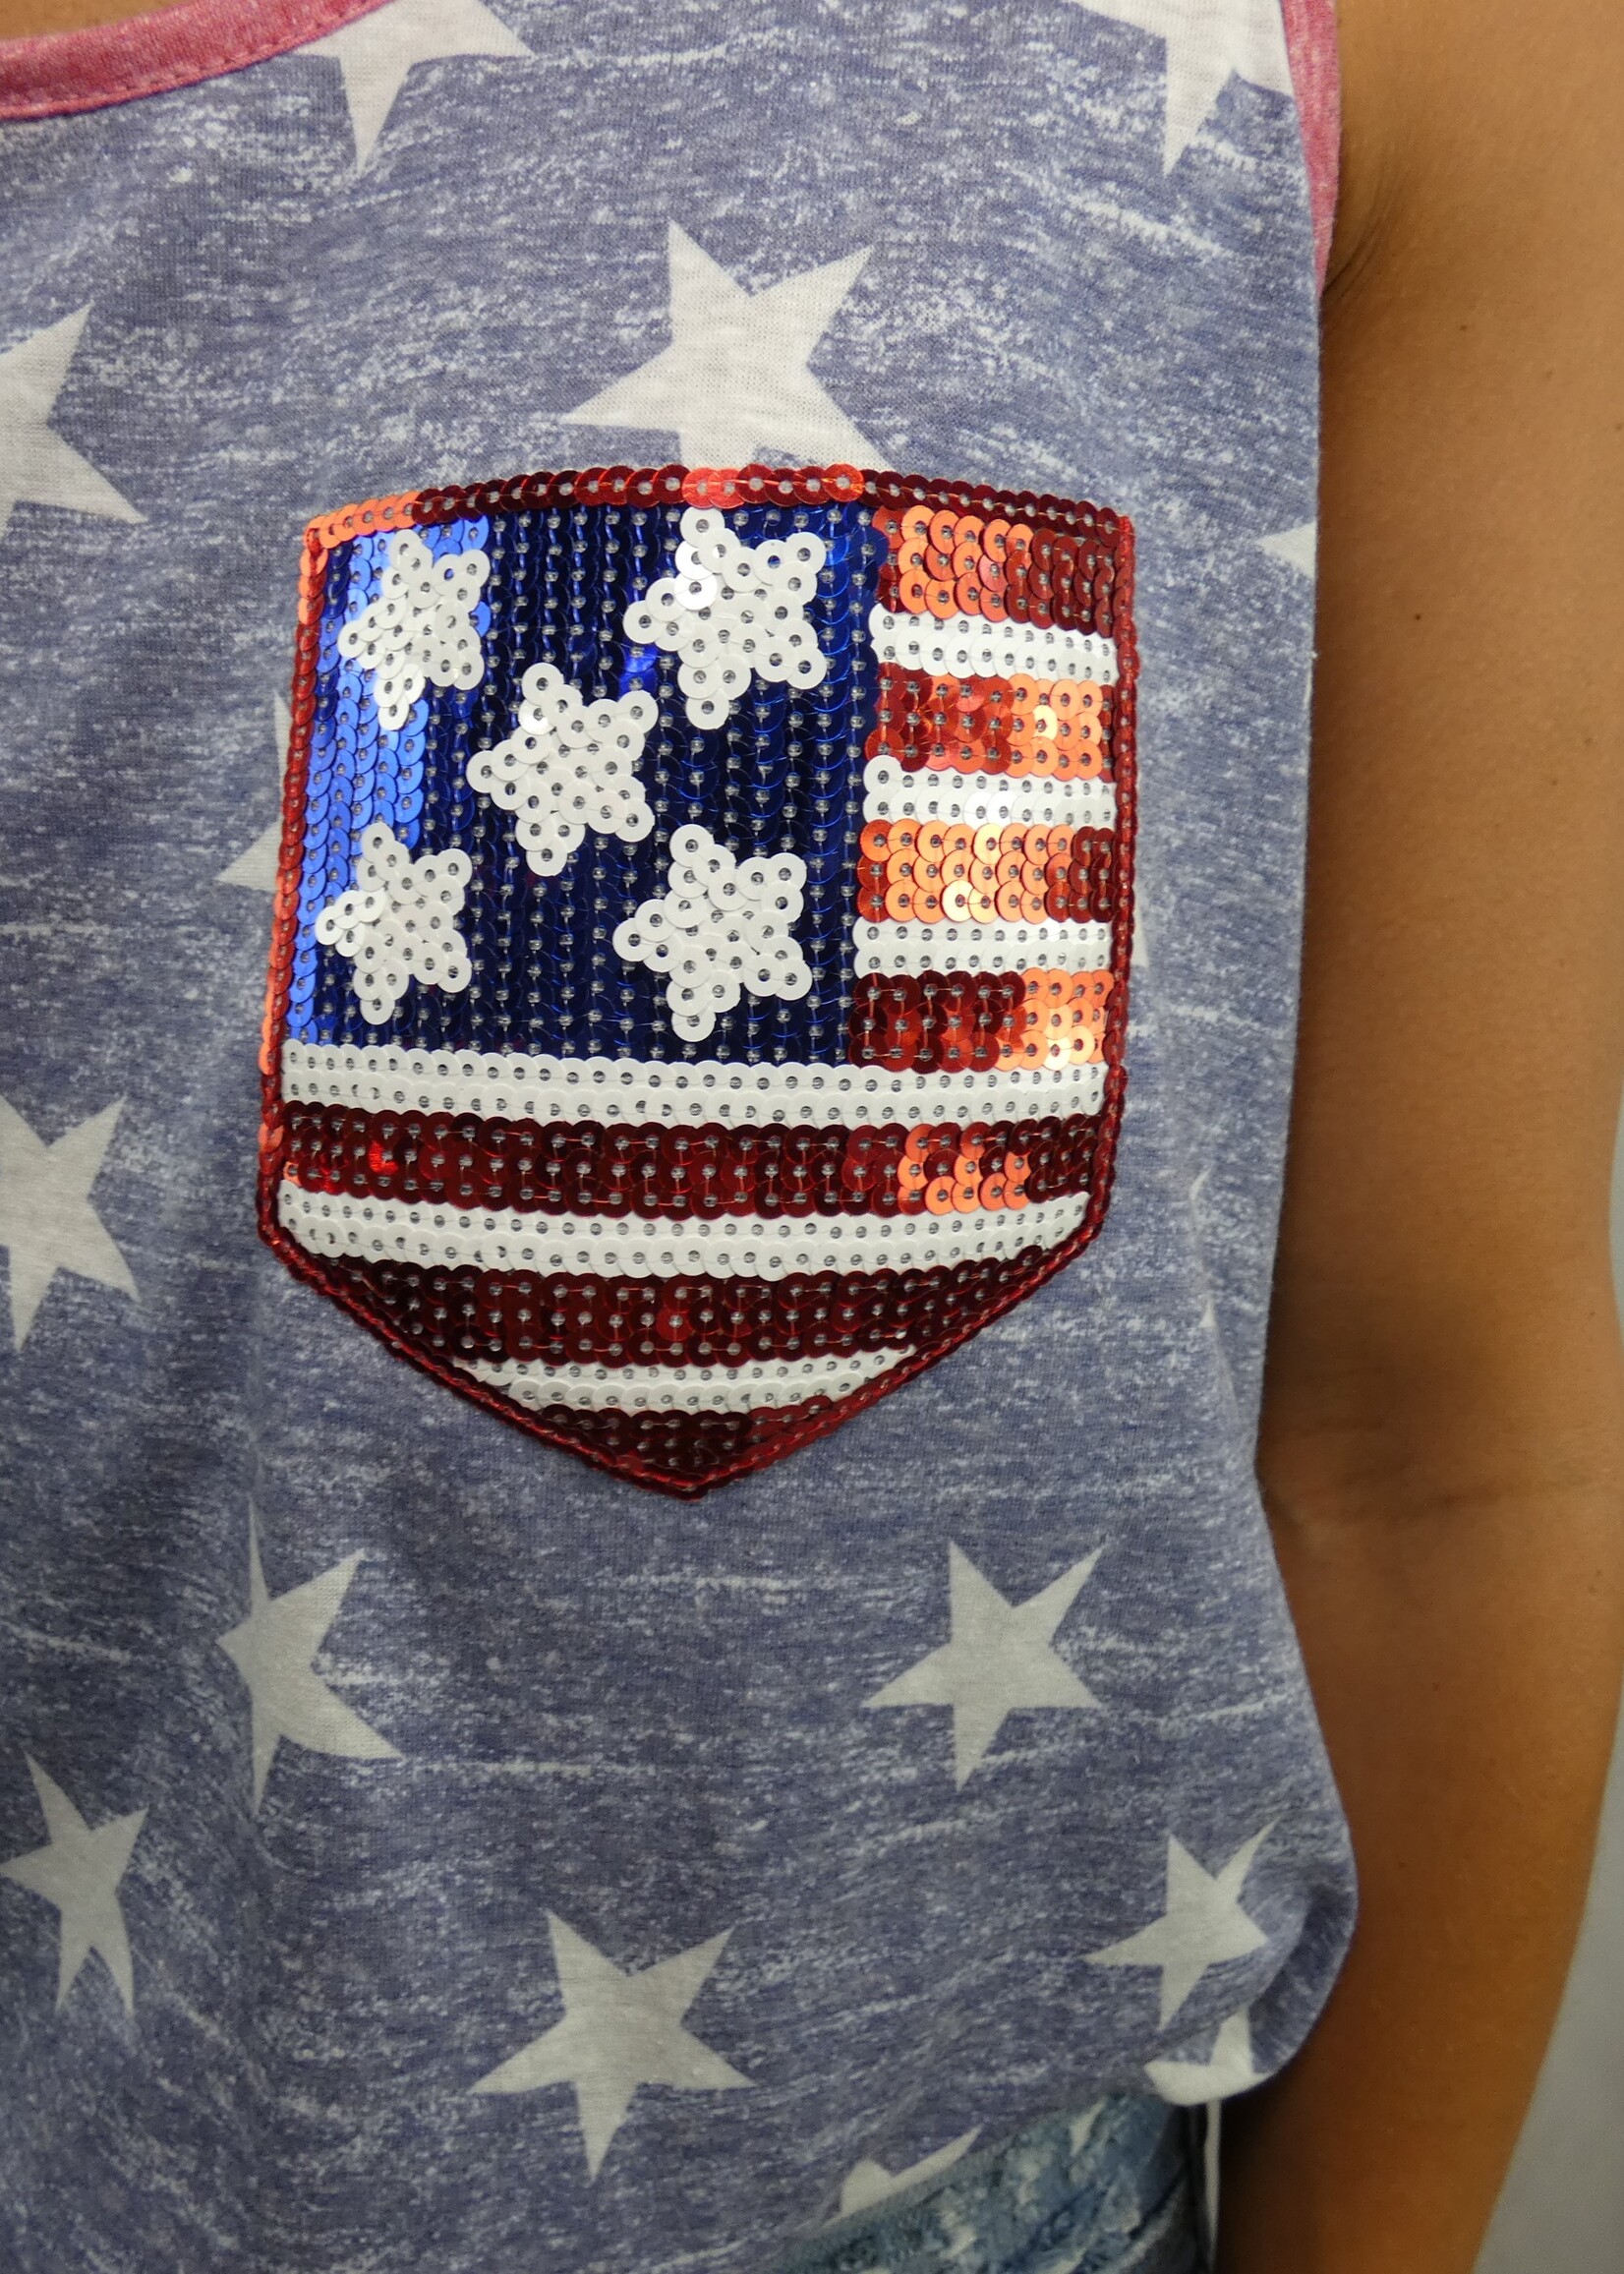 4th of July Tank with Sequin Pocket